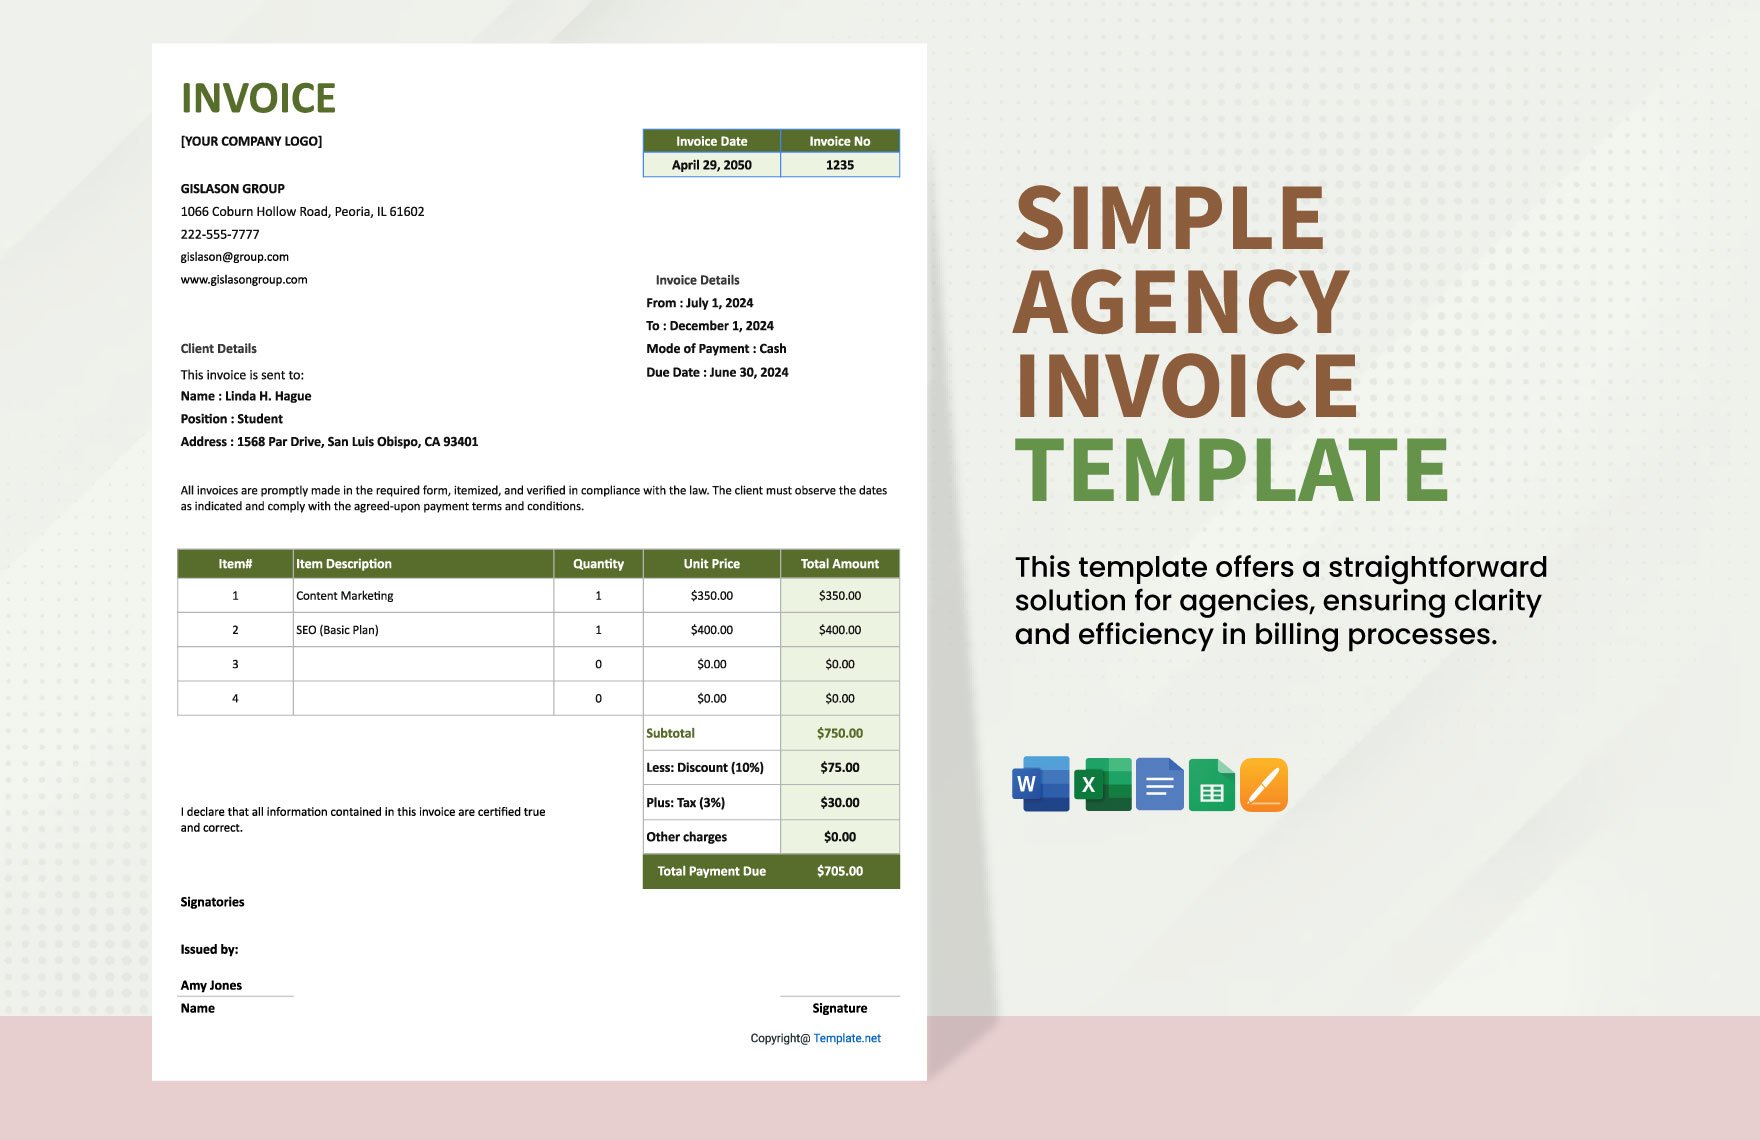 Simple Agency Invoice Template in Word, Google Docs, Excel, Google Sheets, Apple Pages